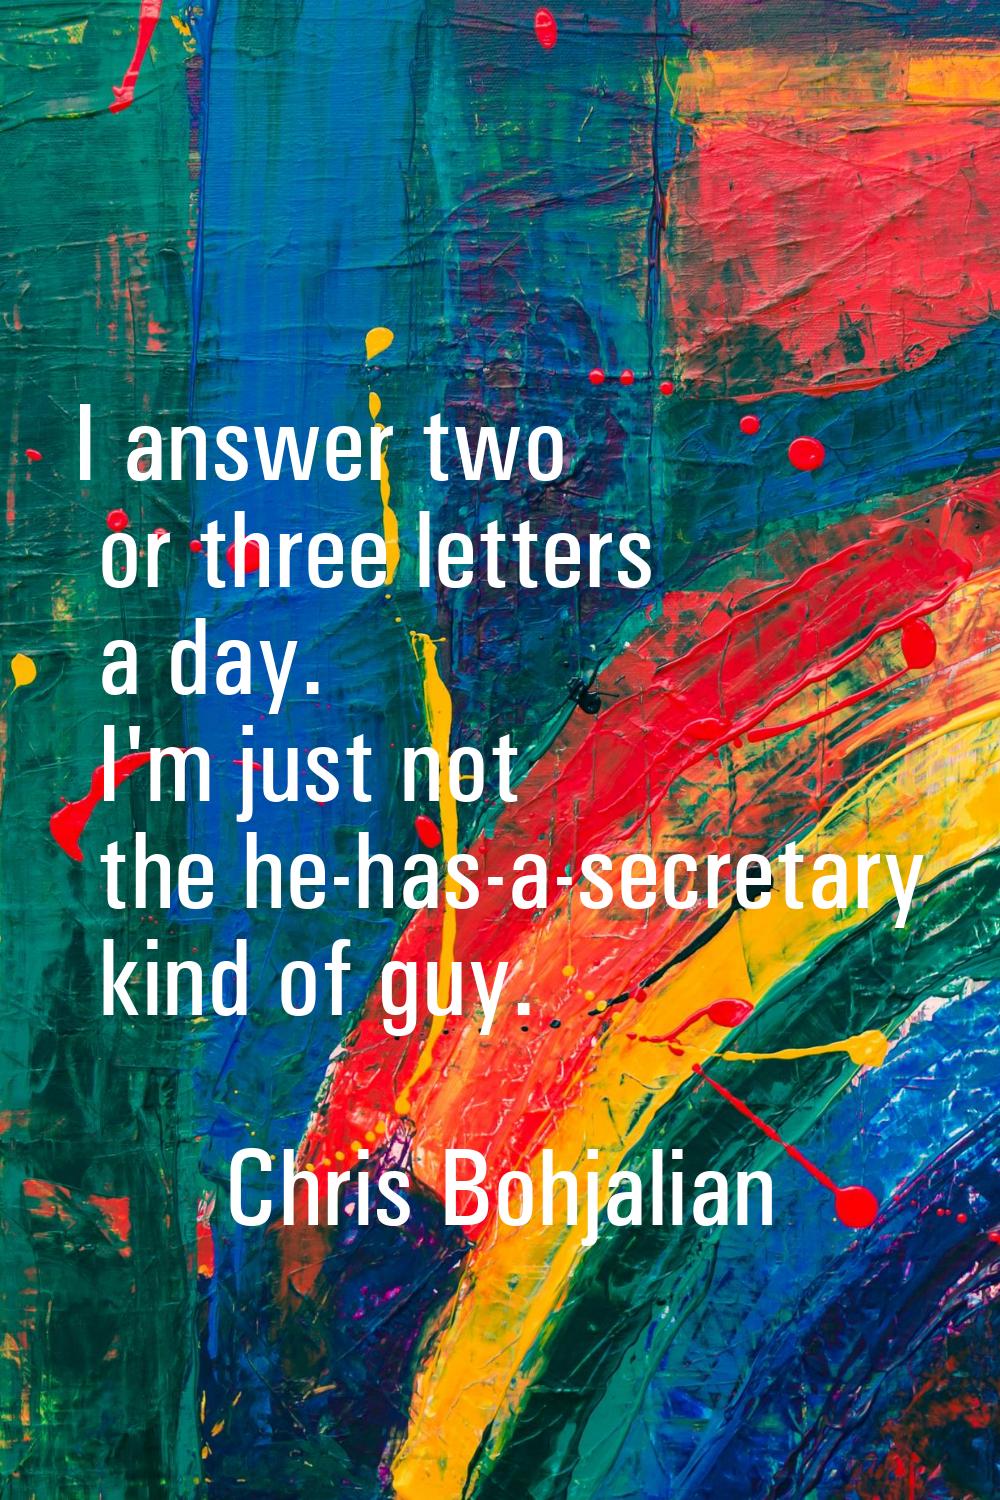 I answer two or three letters a day. I'm just not the he-has-a-secretary kind of guy.